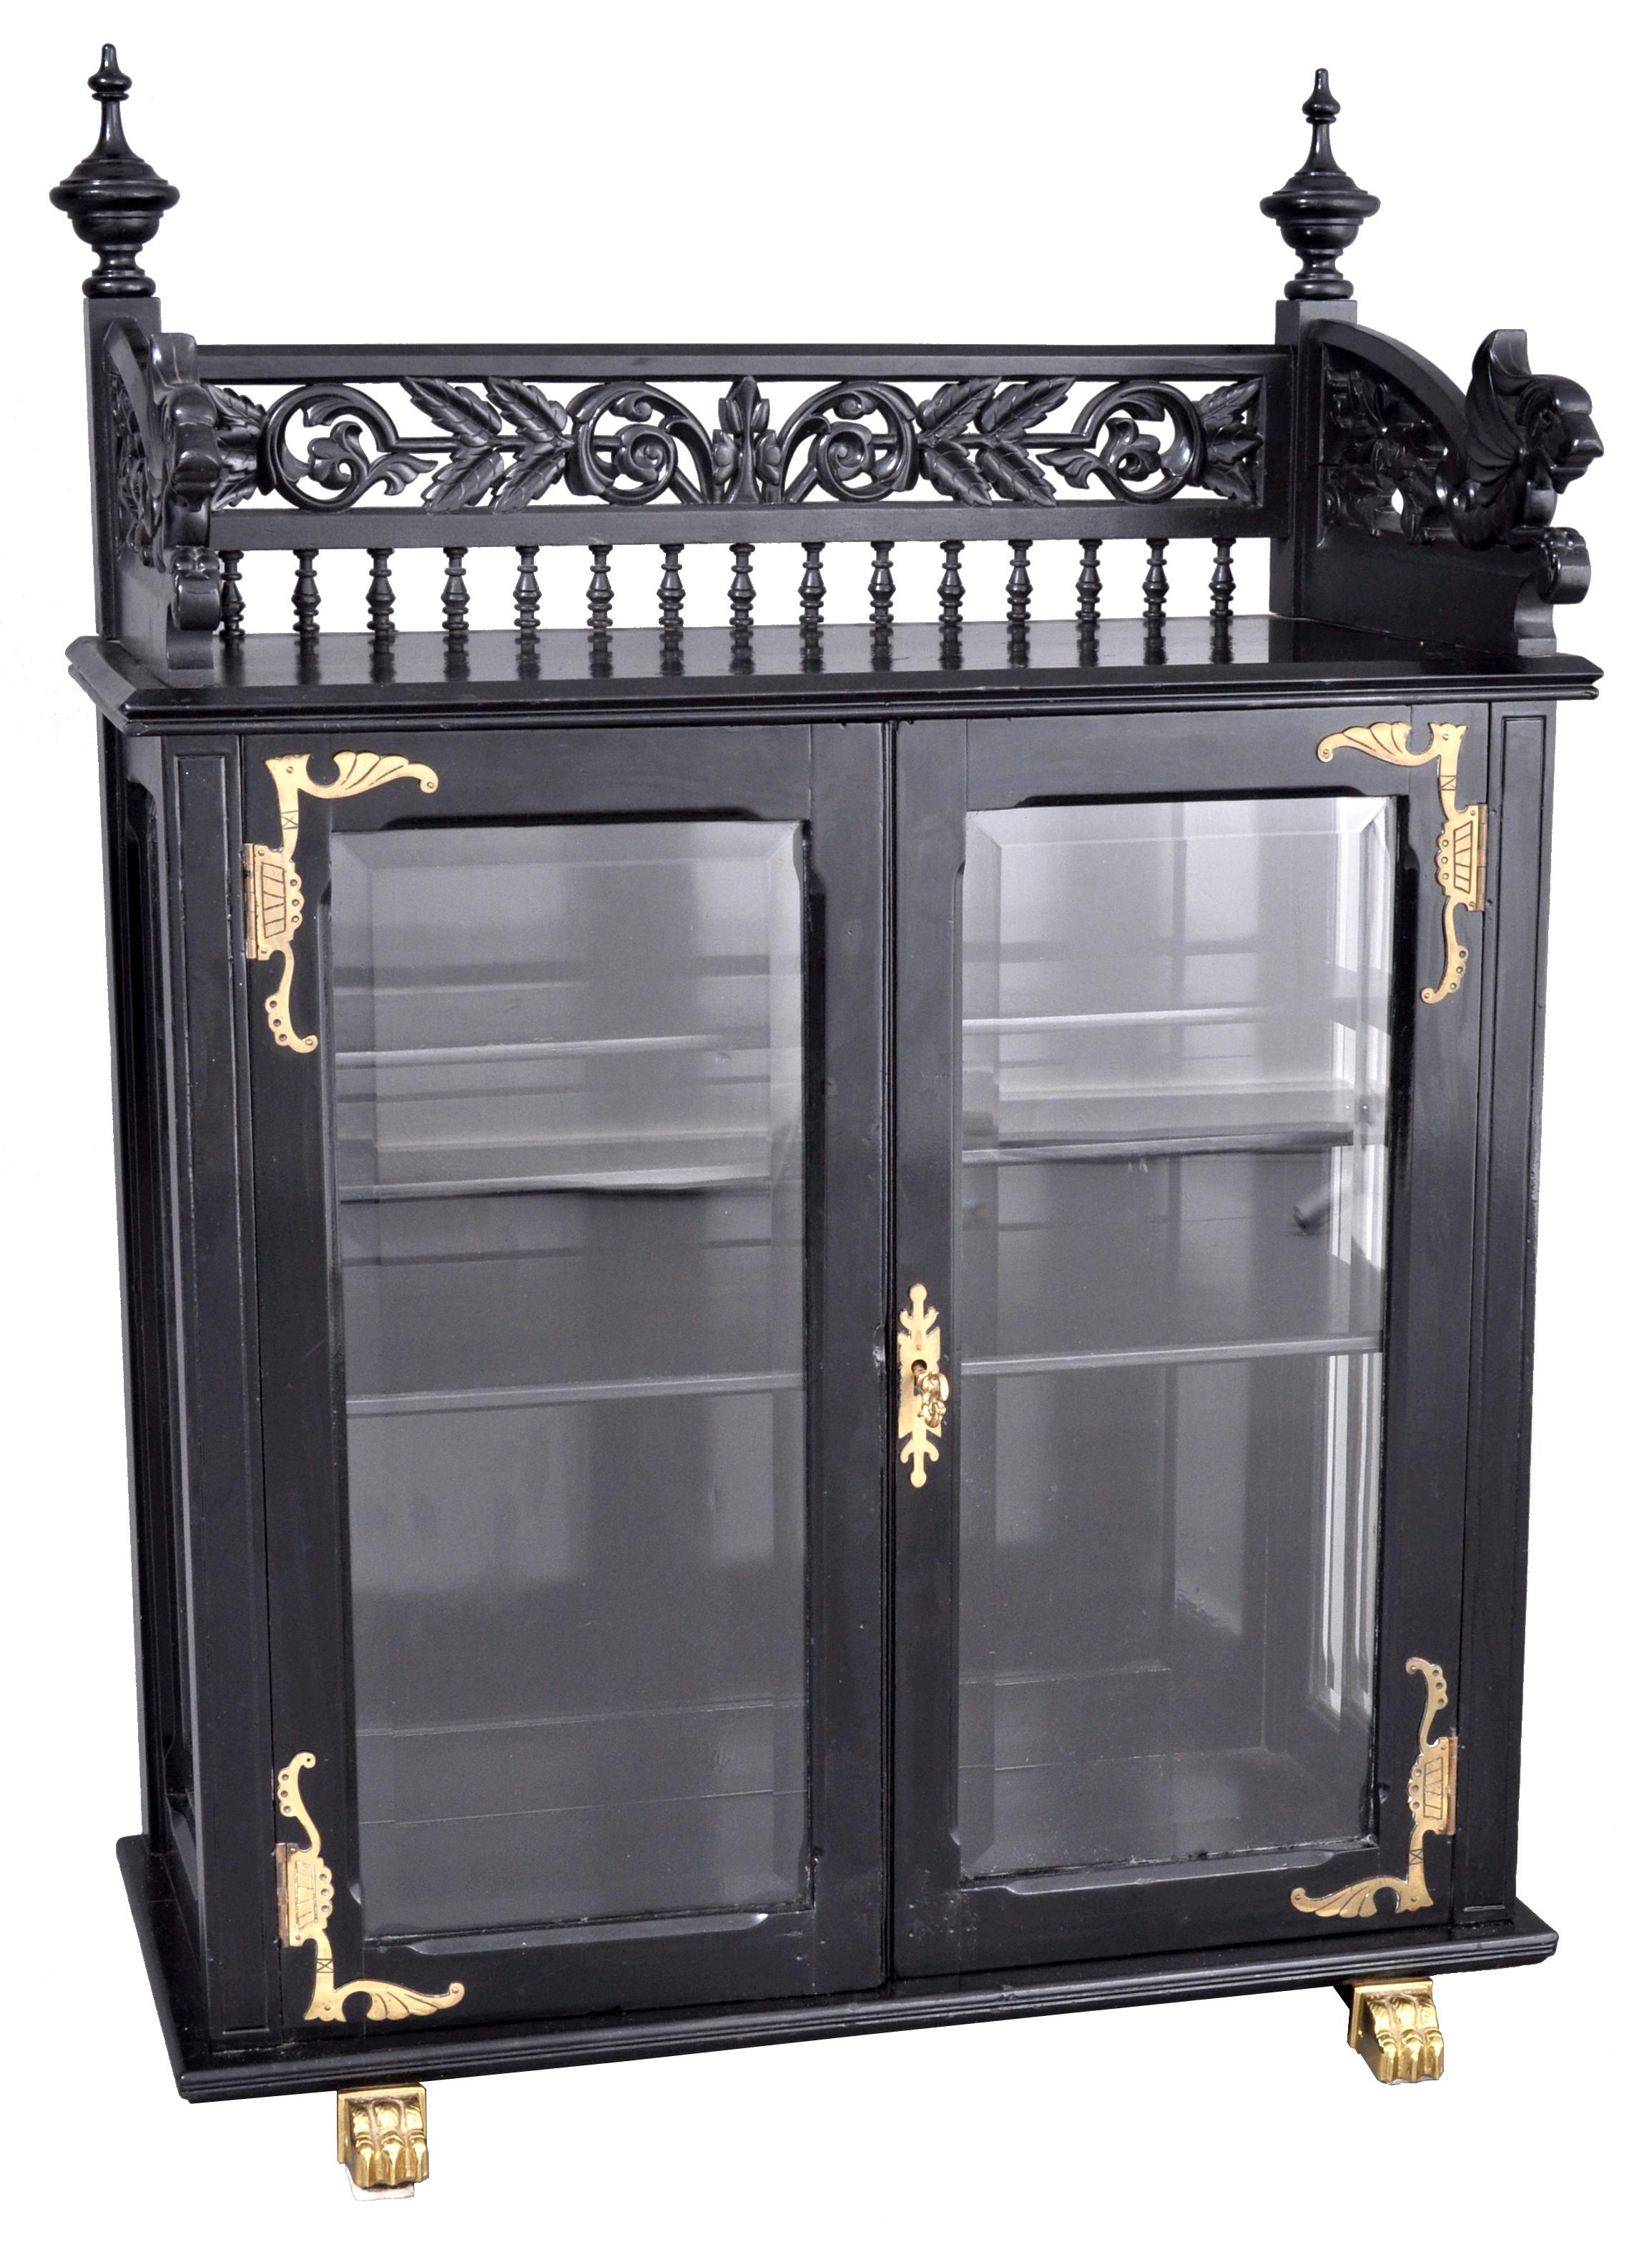 Antique American aesthetic movement carved and lacquered Griffin collector's cabinet, Hutch, circa 1870. The cabinet having an ornately carved and spindled gallery with a pair of tall turned finials and having a pair of resting griffins on each end